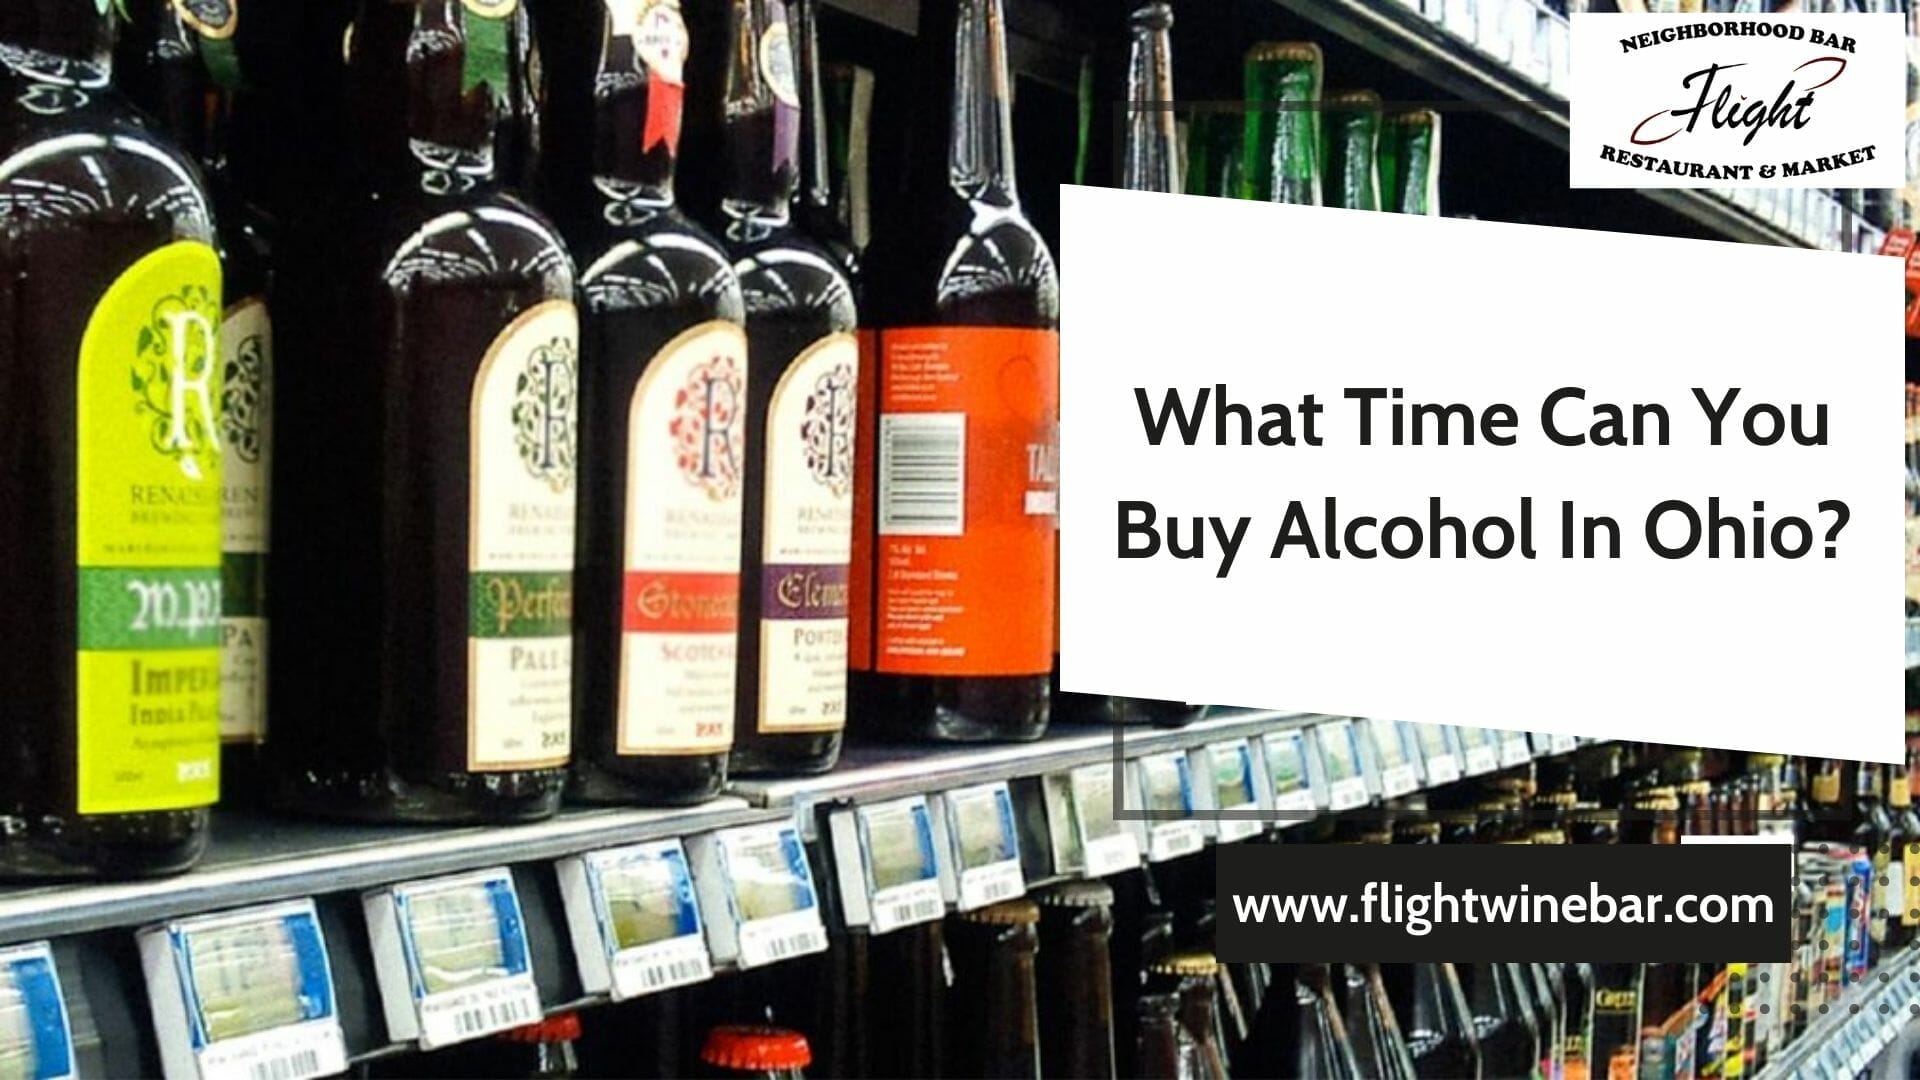 What Time Can You Buy Alcohol In Ohio